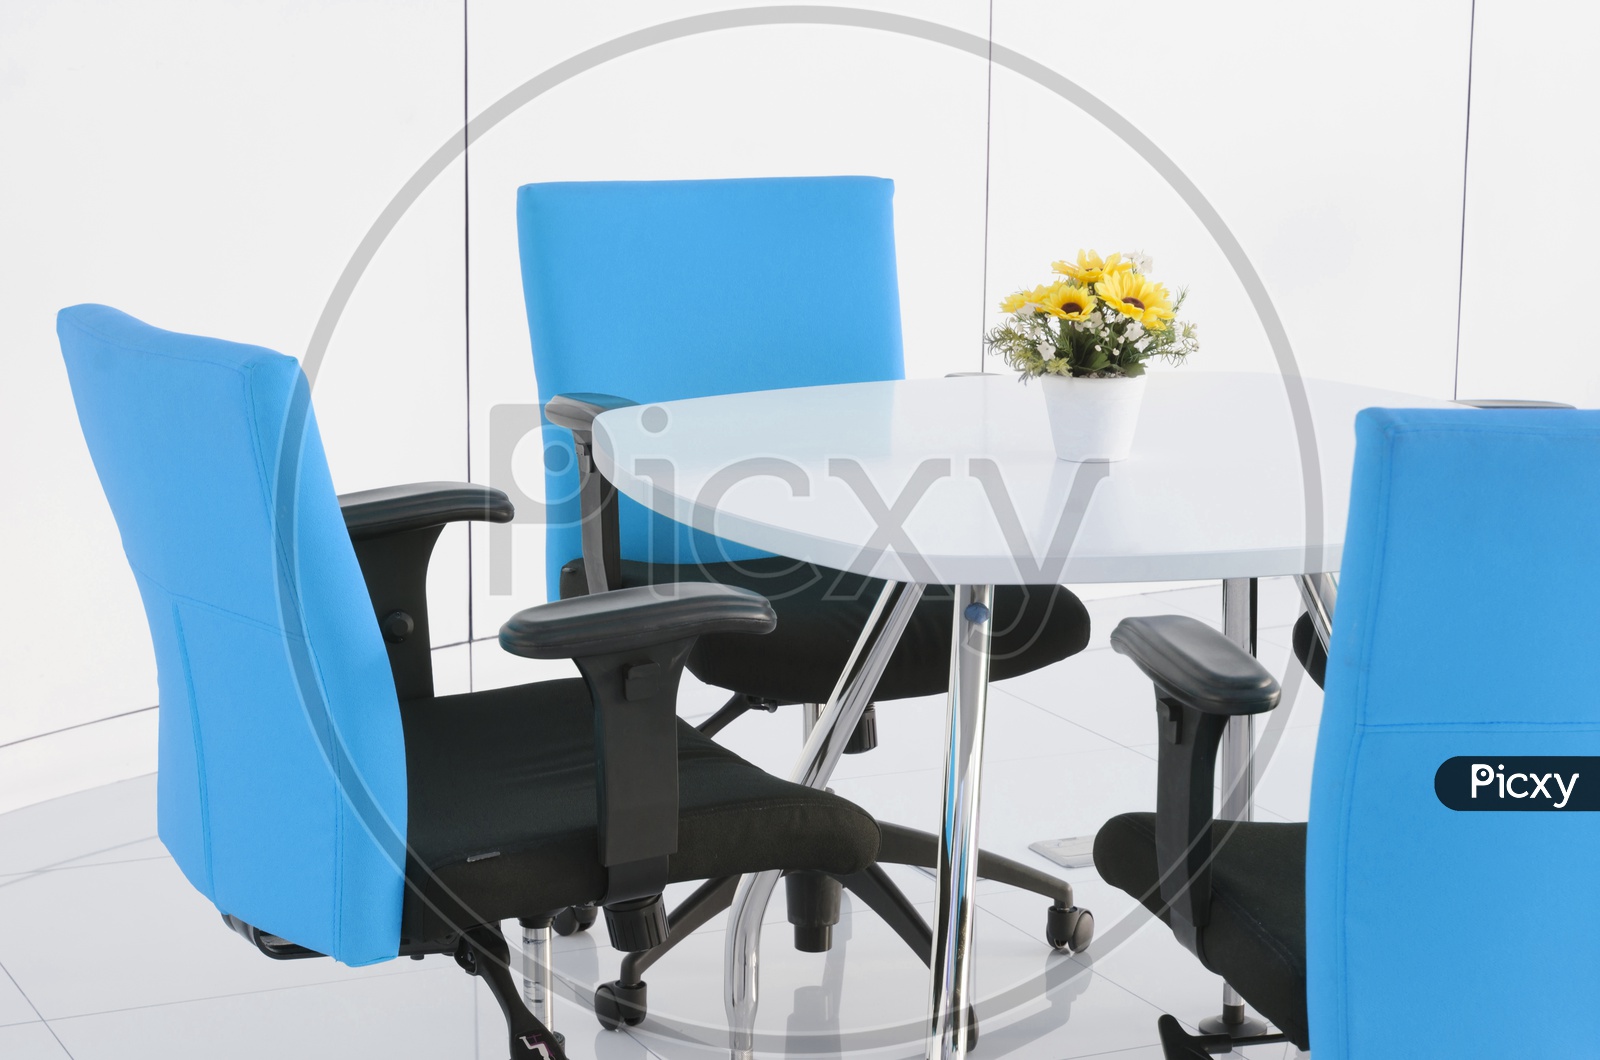 An office table with blue chairs